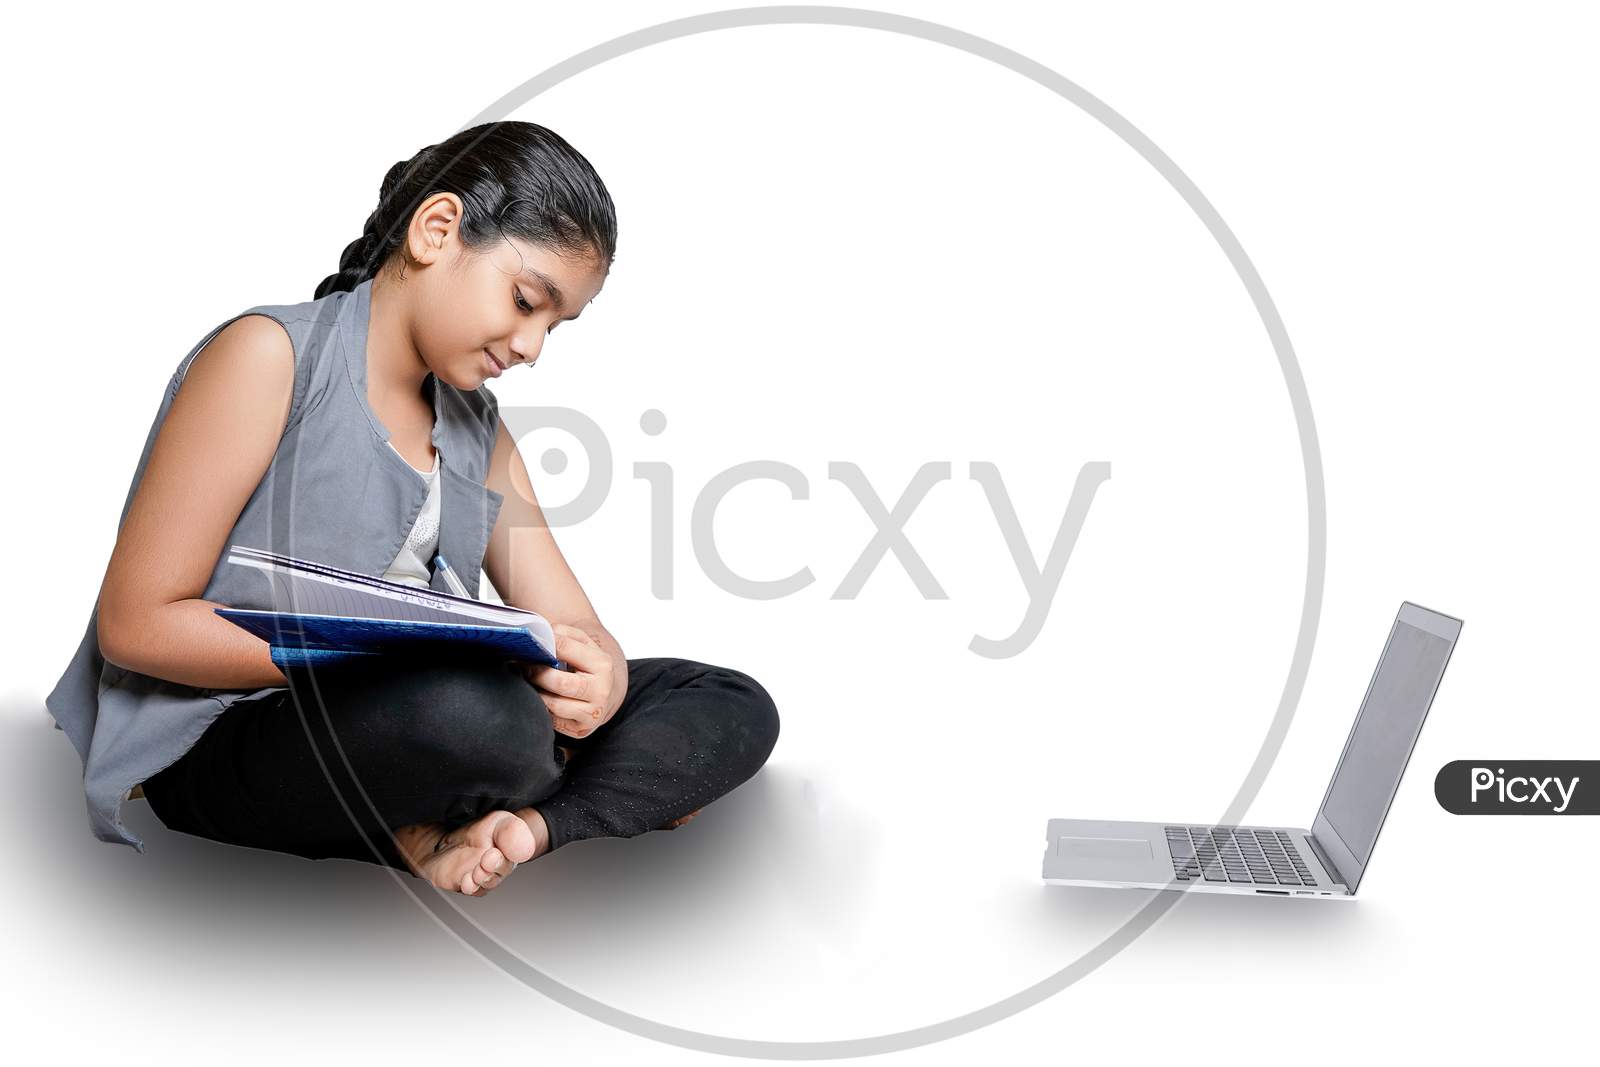 Indian Girl Online Studying